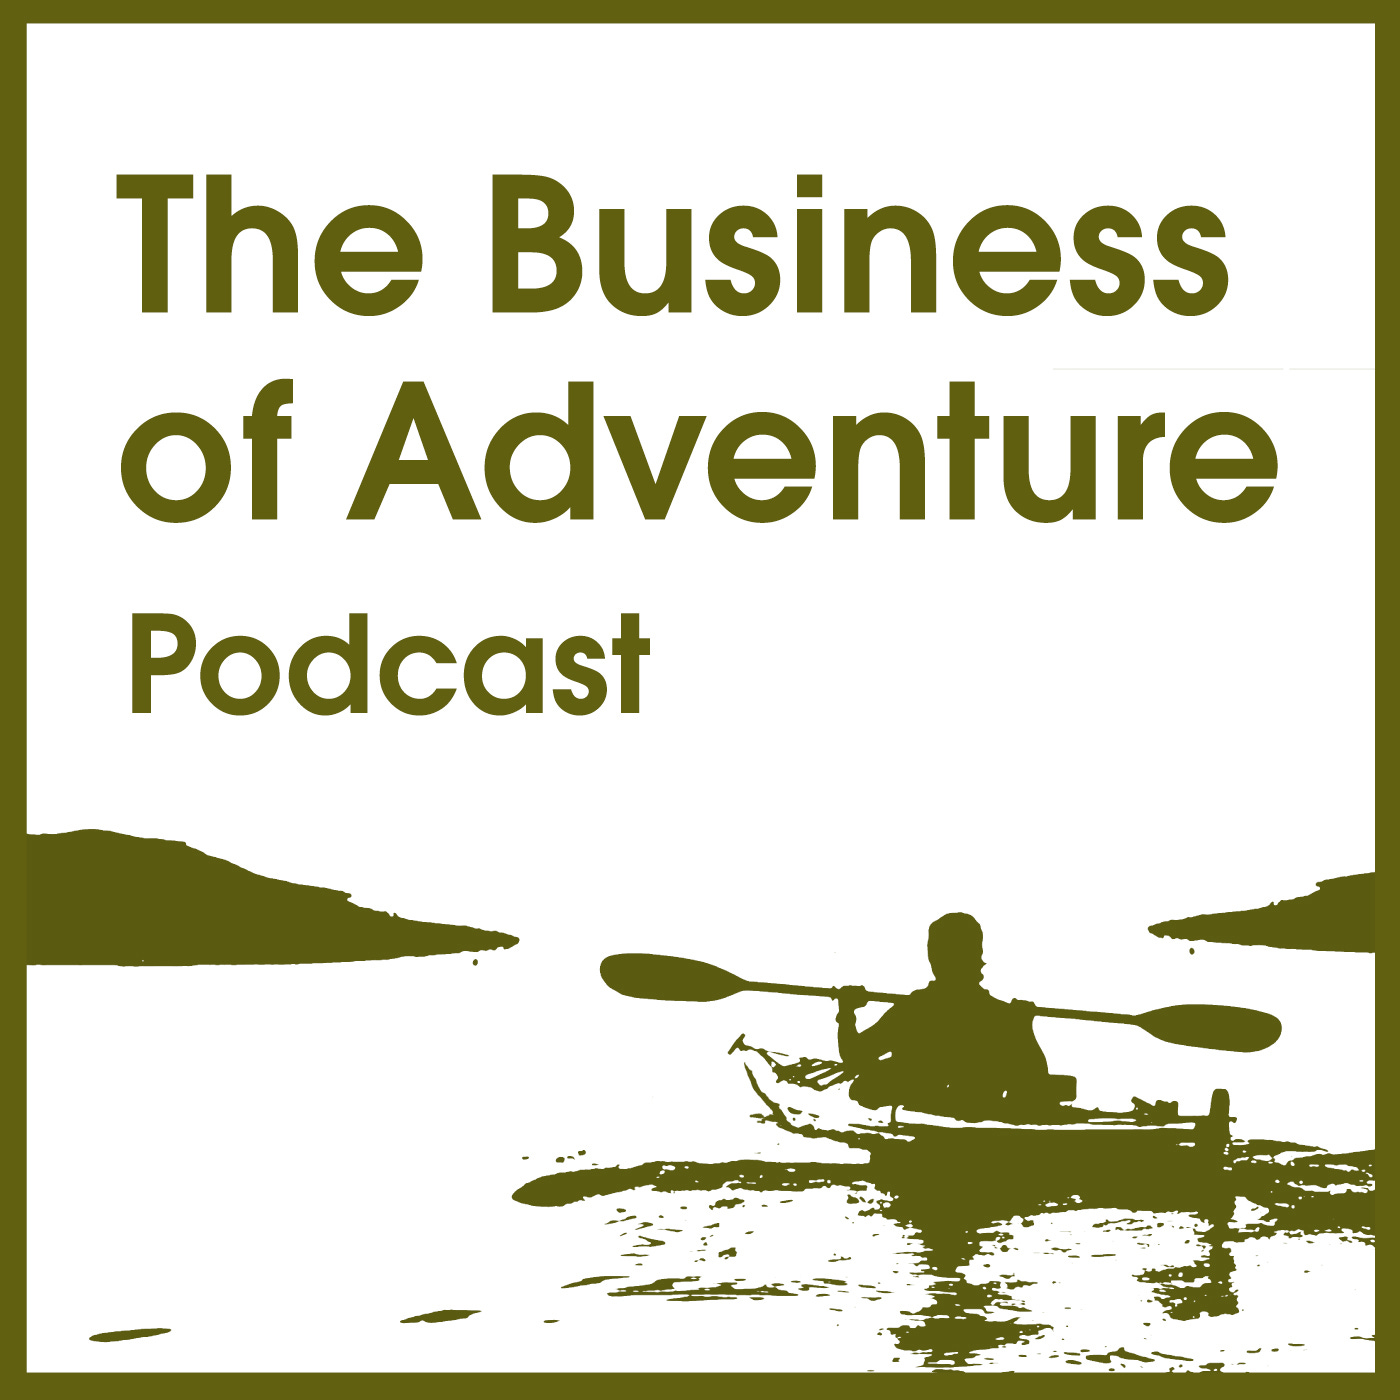 Building strong foundations for an adventure business